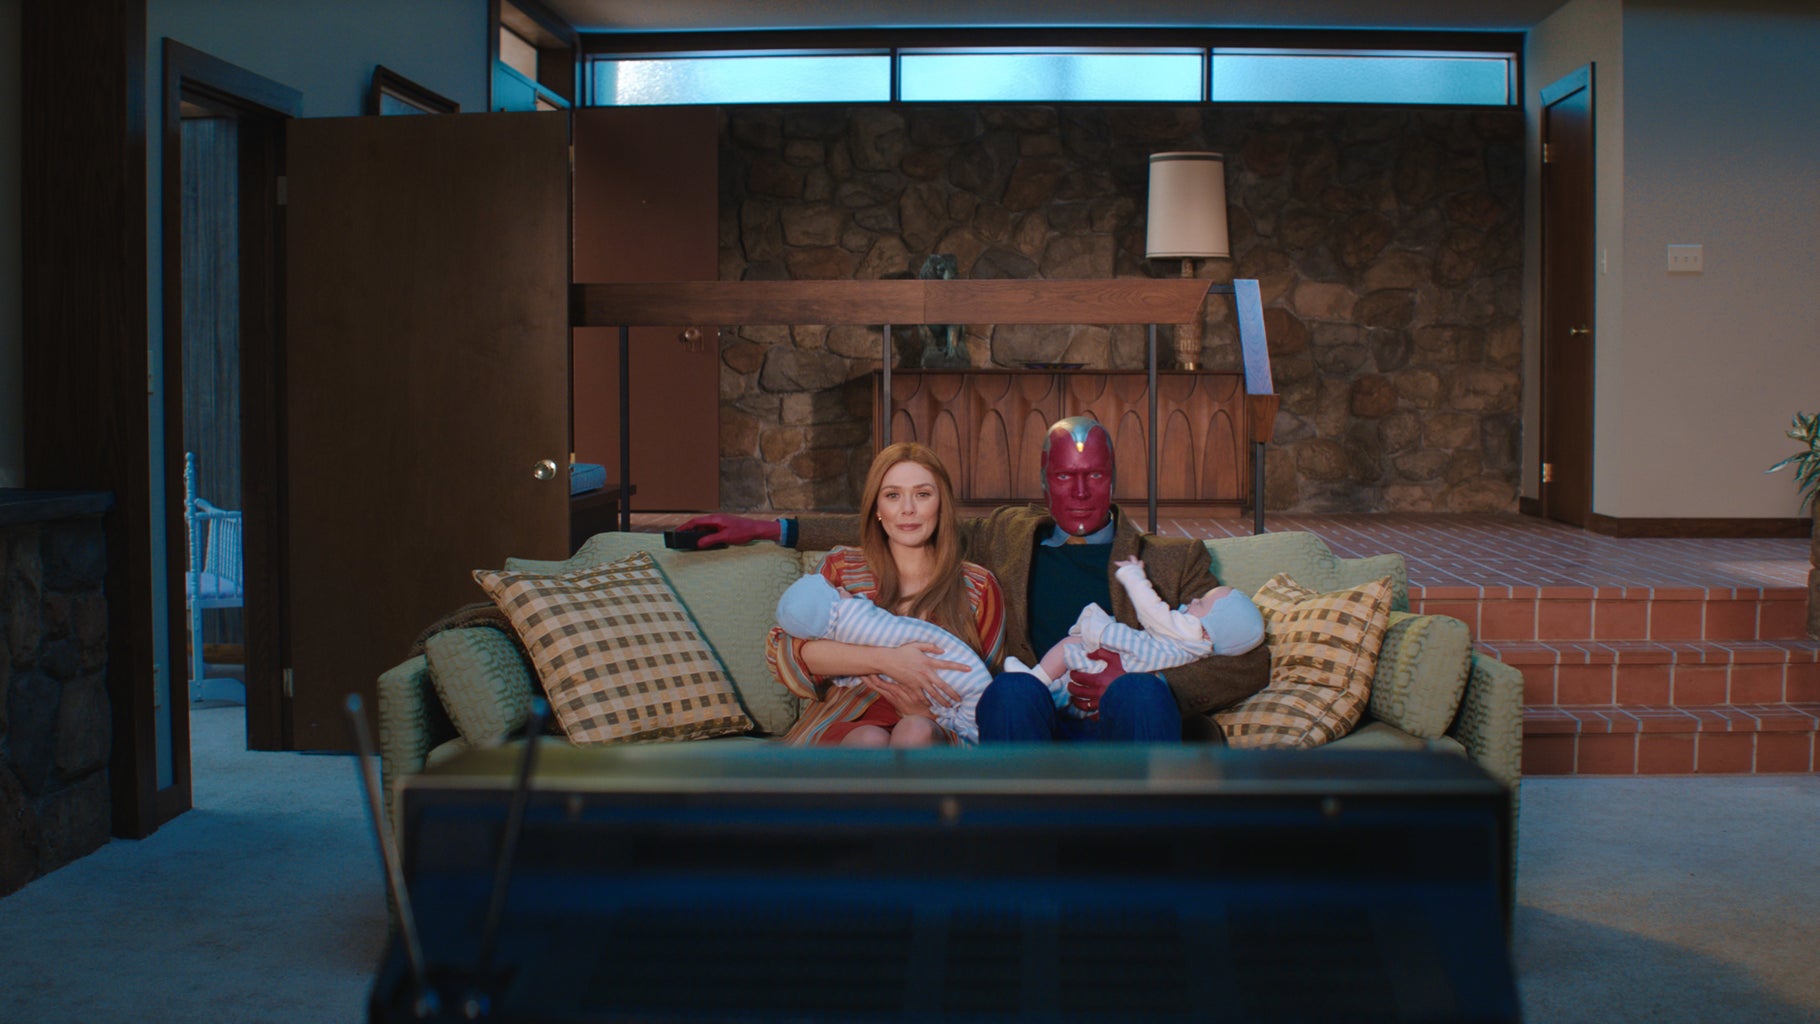 Wanda and Vision holding babies in front of a TV in Wandavision